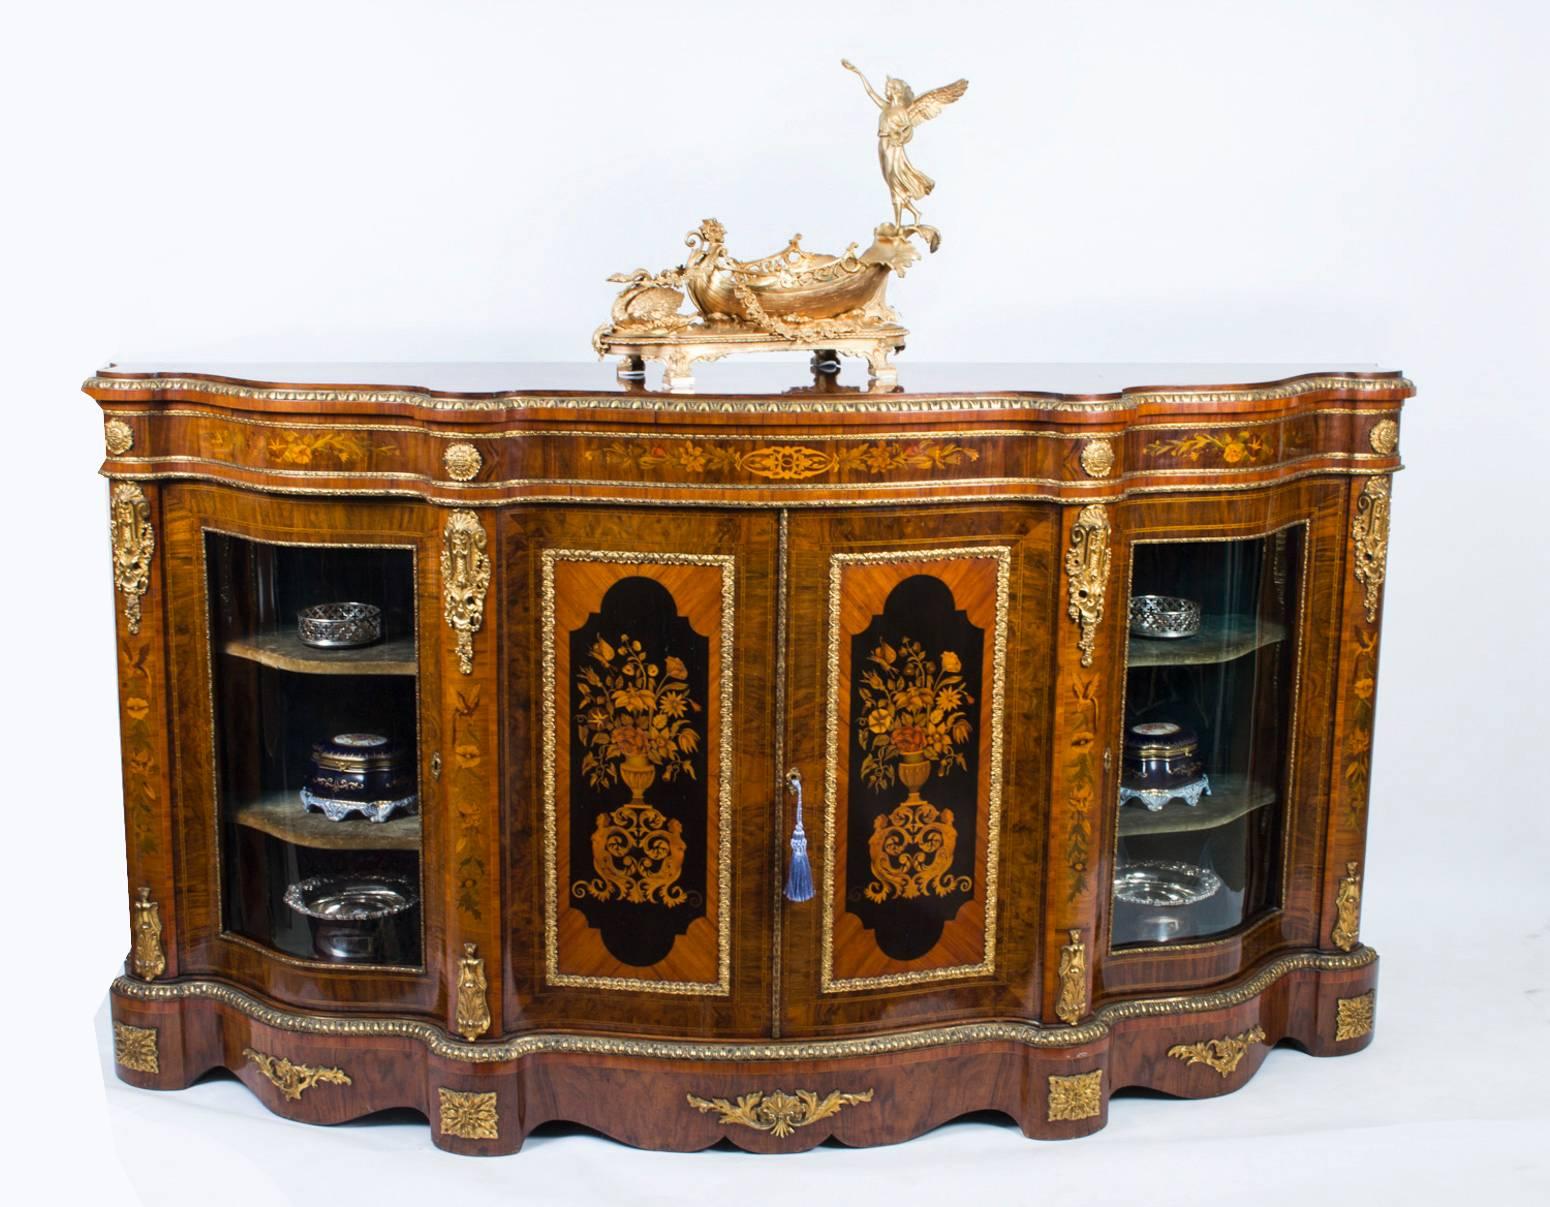 This is a superb antique Victorian ormolu mounted burr walnut and kingwood floral marquetry inlaid credenza, circa 1860 in date. Oozing sophistication and charm, this credenza is the absolute epitome of Victorian High Society.

The entire piece